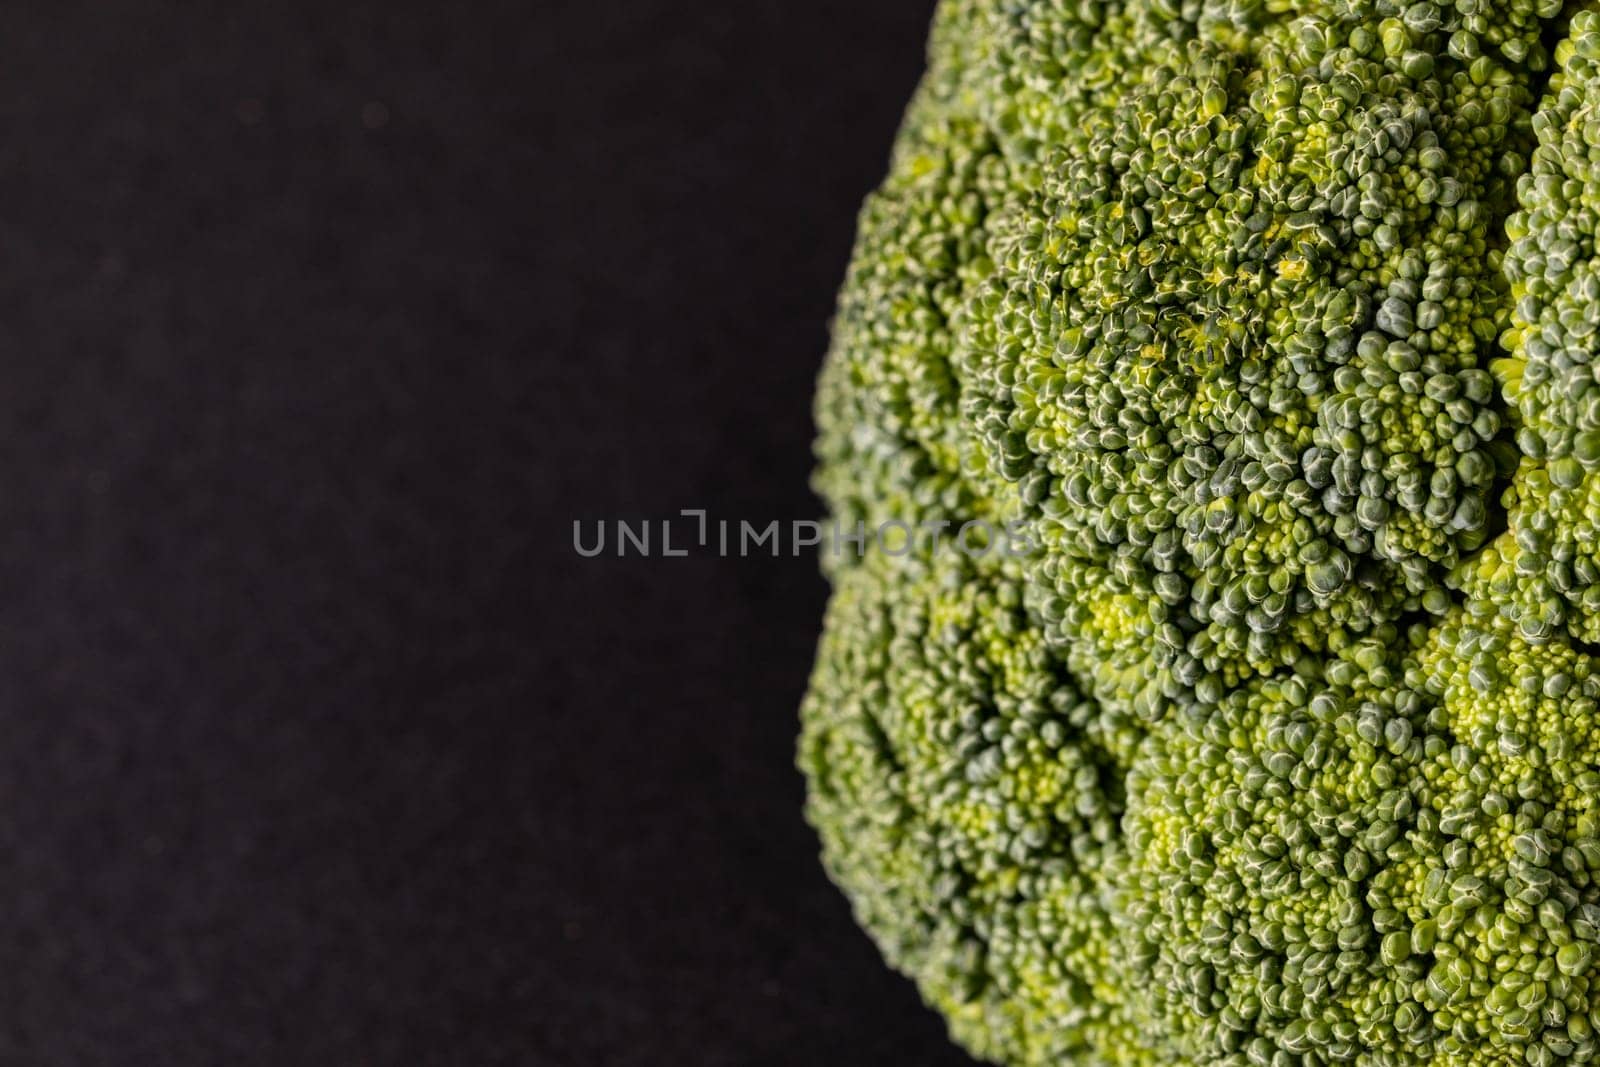 Extreme close-up of fresh green broccoli on black background with copy space. unaltered, vegetable, healthy food, raw food and organic concept.